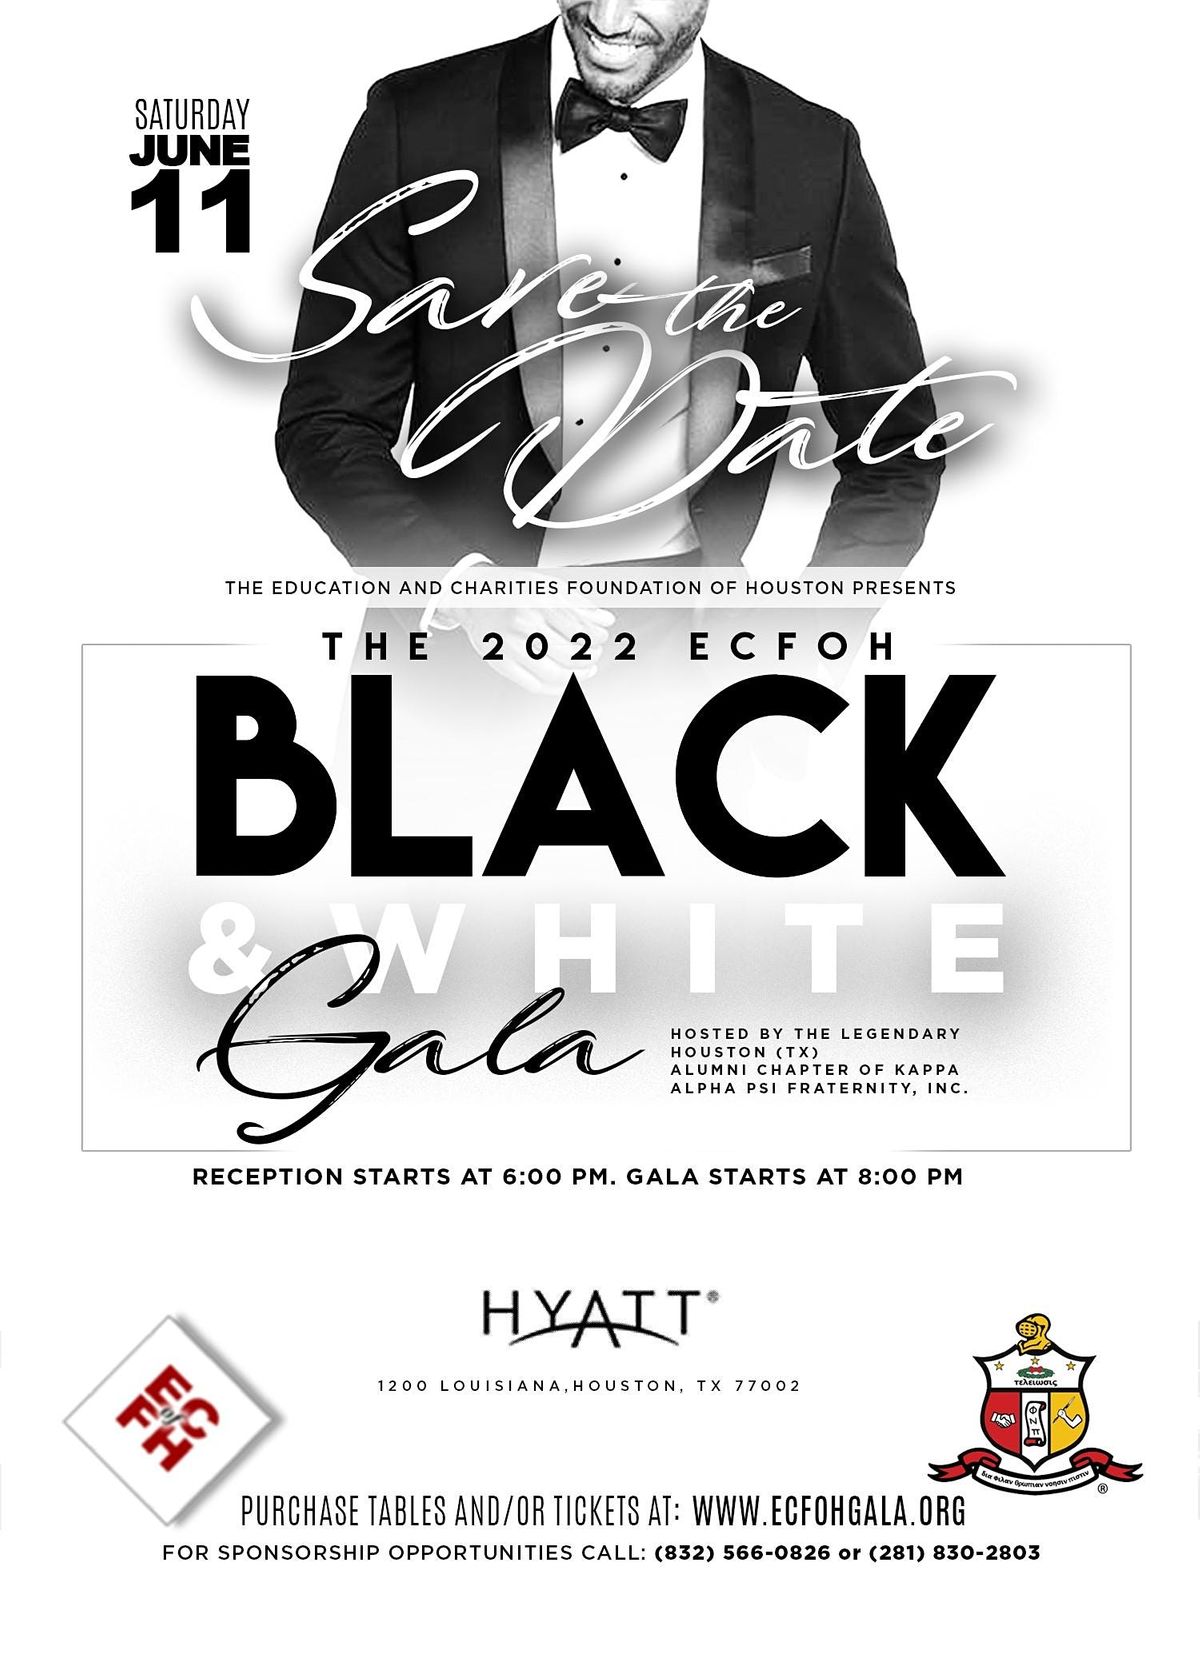 THE 2022 ECFOH BLACK AND WHITE GALA